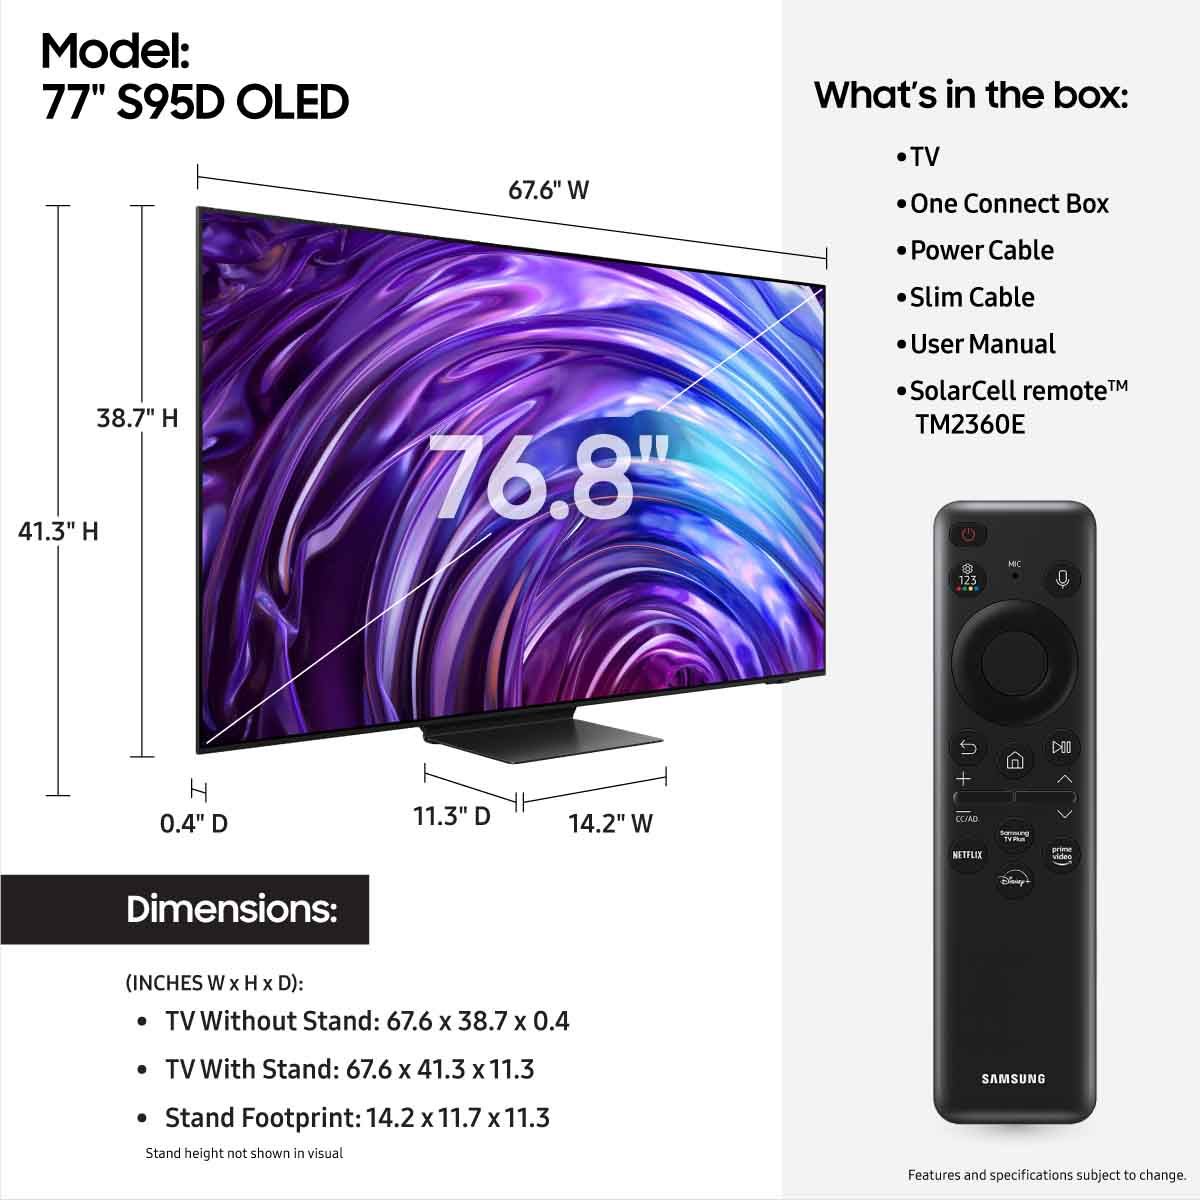 Samsung S95D OLED 4K Smart TV - 77" - dimensions and what's in the box